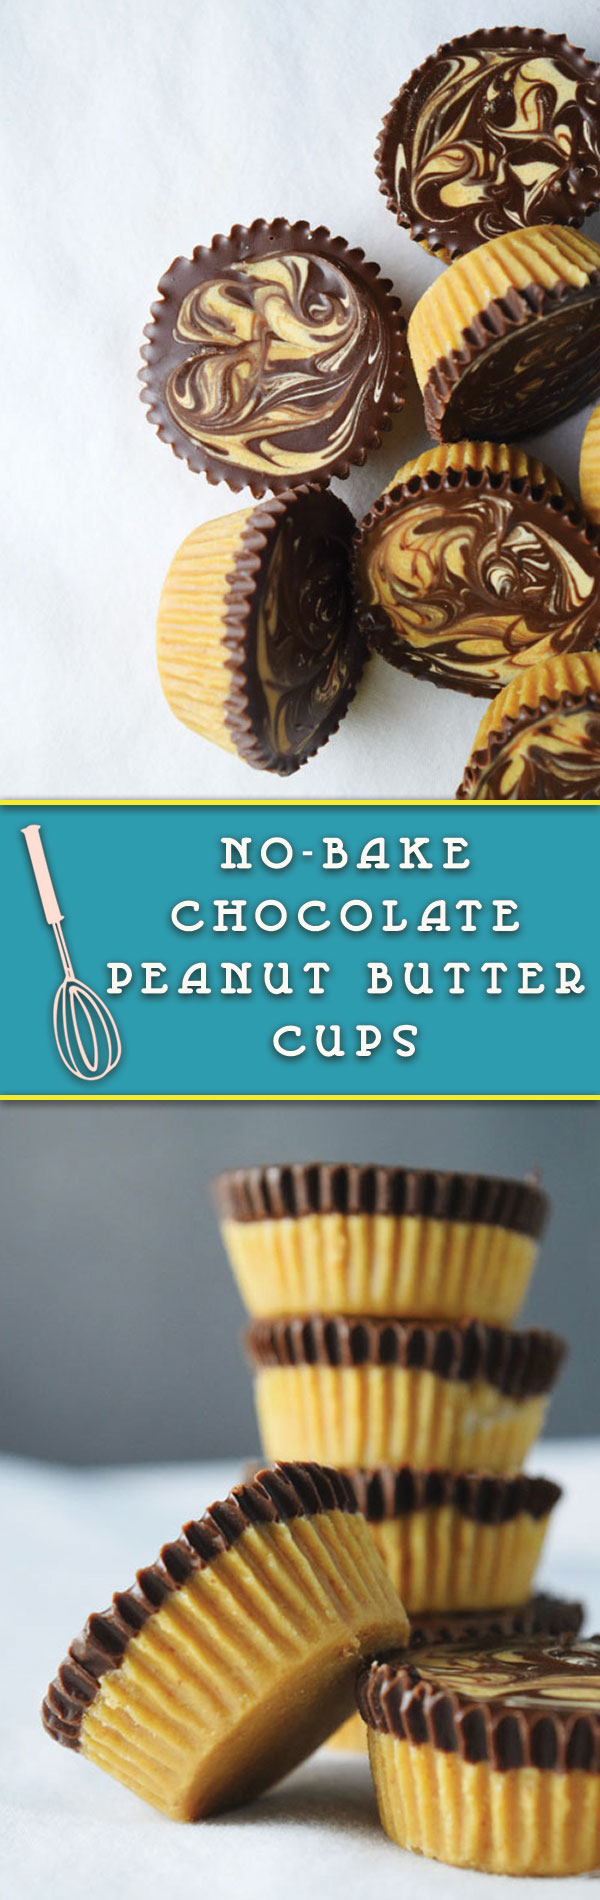 no bake chocolate peanut butter cups - easy NO BAKE peanut butter cups, perfect healthy treat! These are so good that I always keep some to munch on! Guilt free snacking!